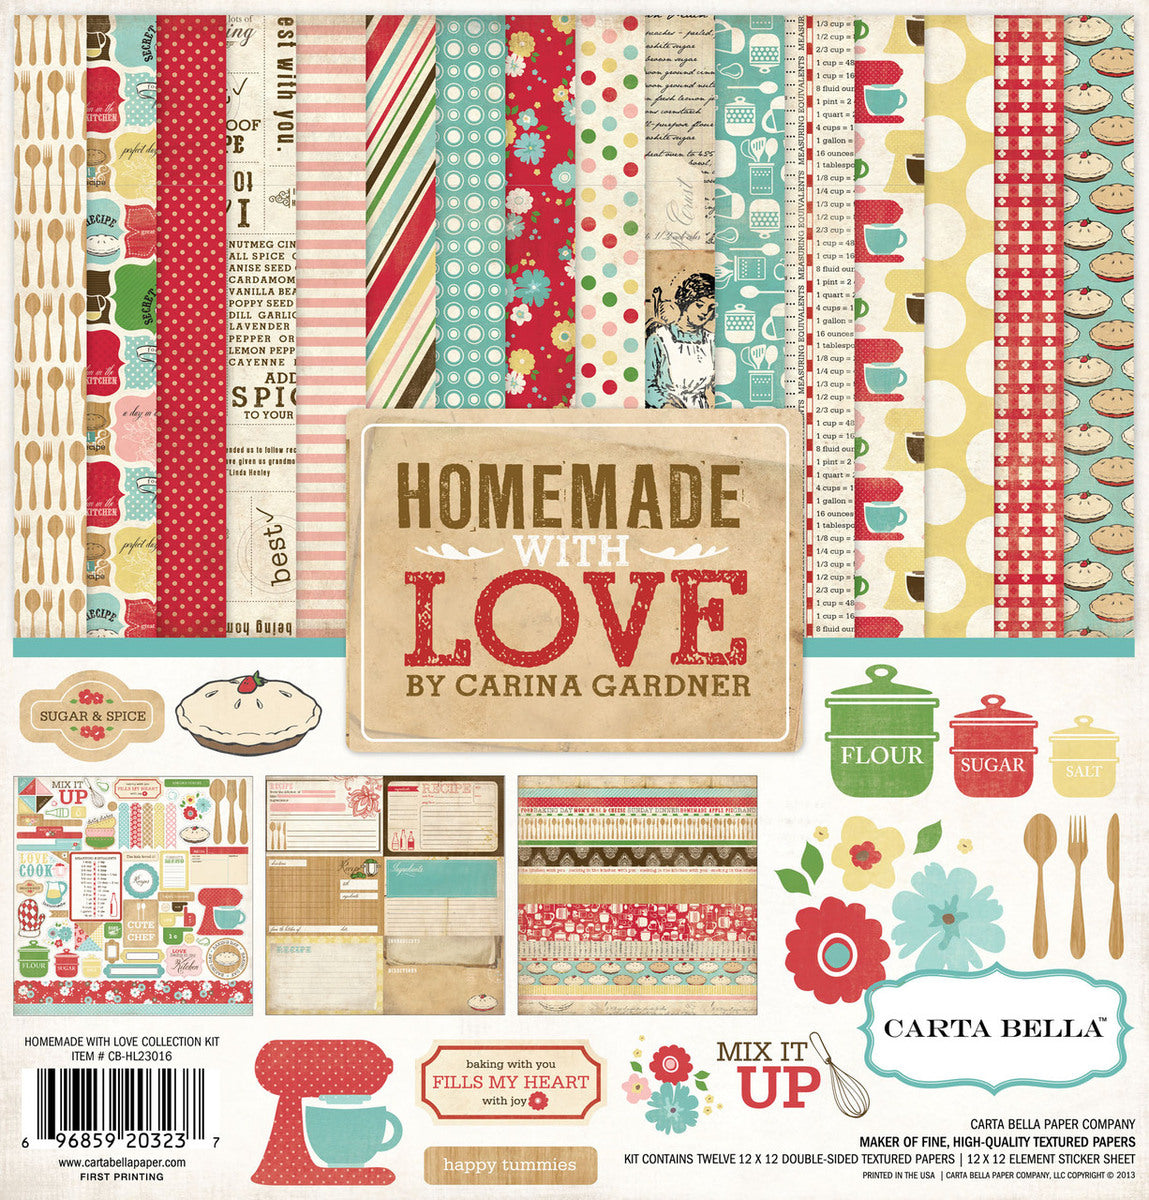 Digital Scrapbooking Kits, Best of Belgium-page kit-(MSG), Food -  Recipes, Vacations - Travel